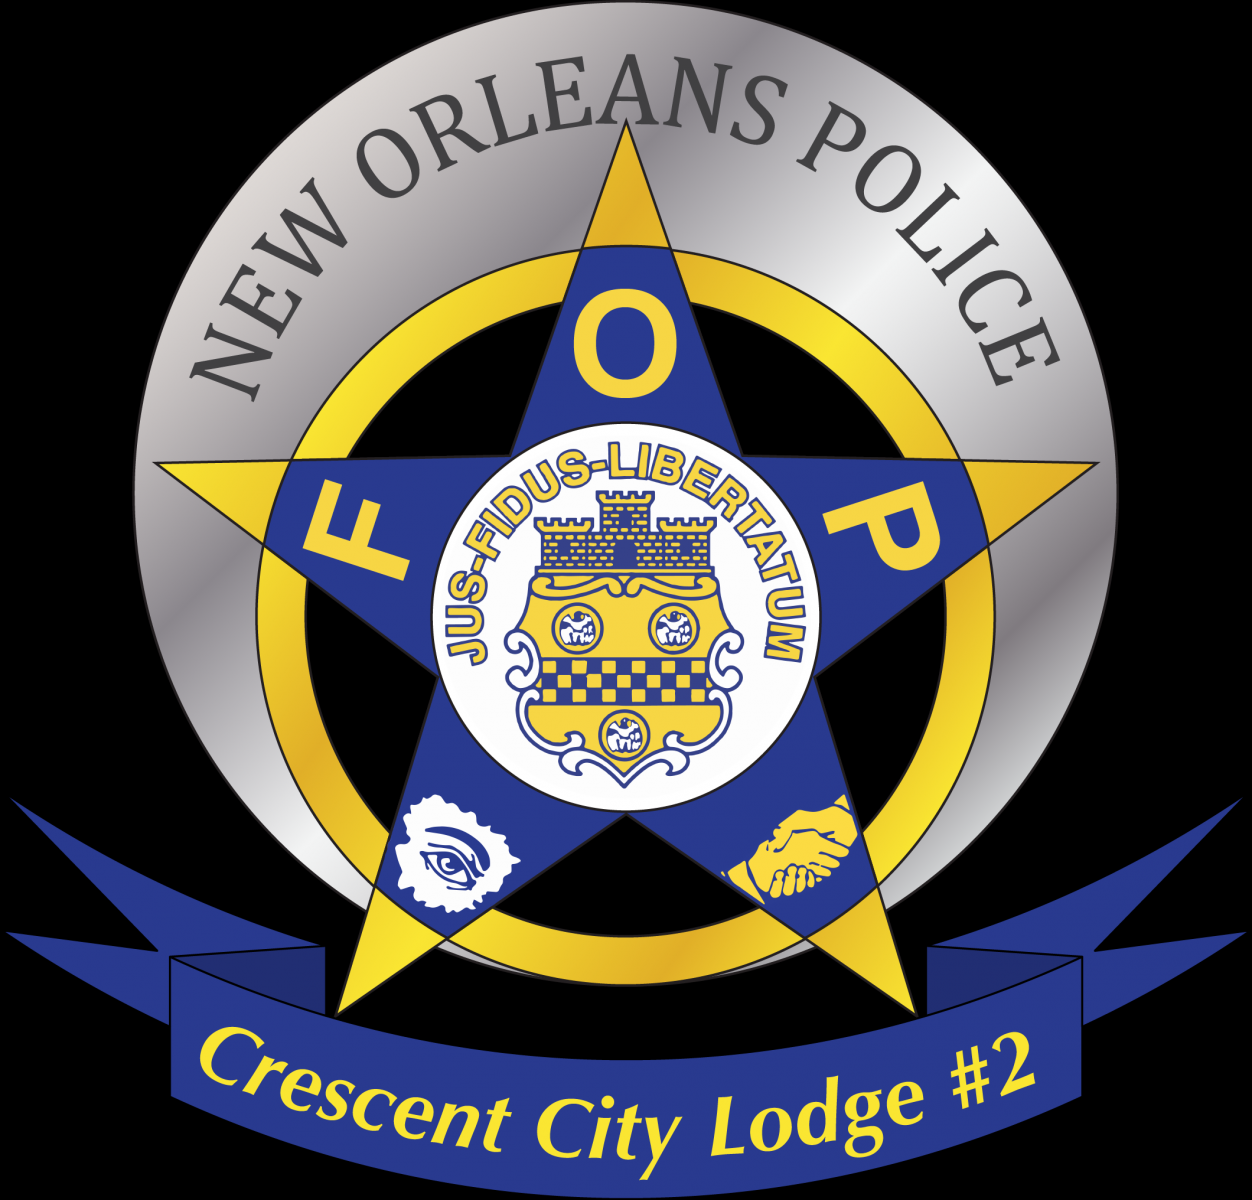 New Orleans Police